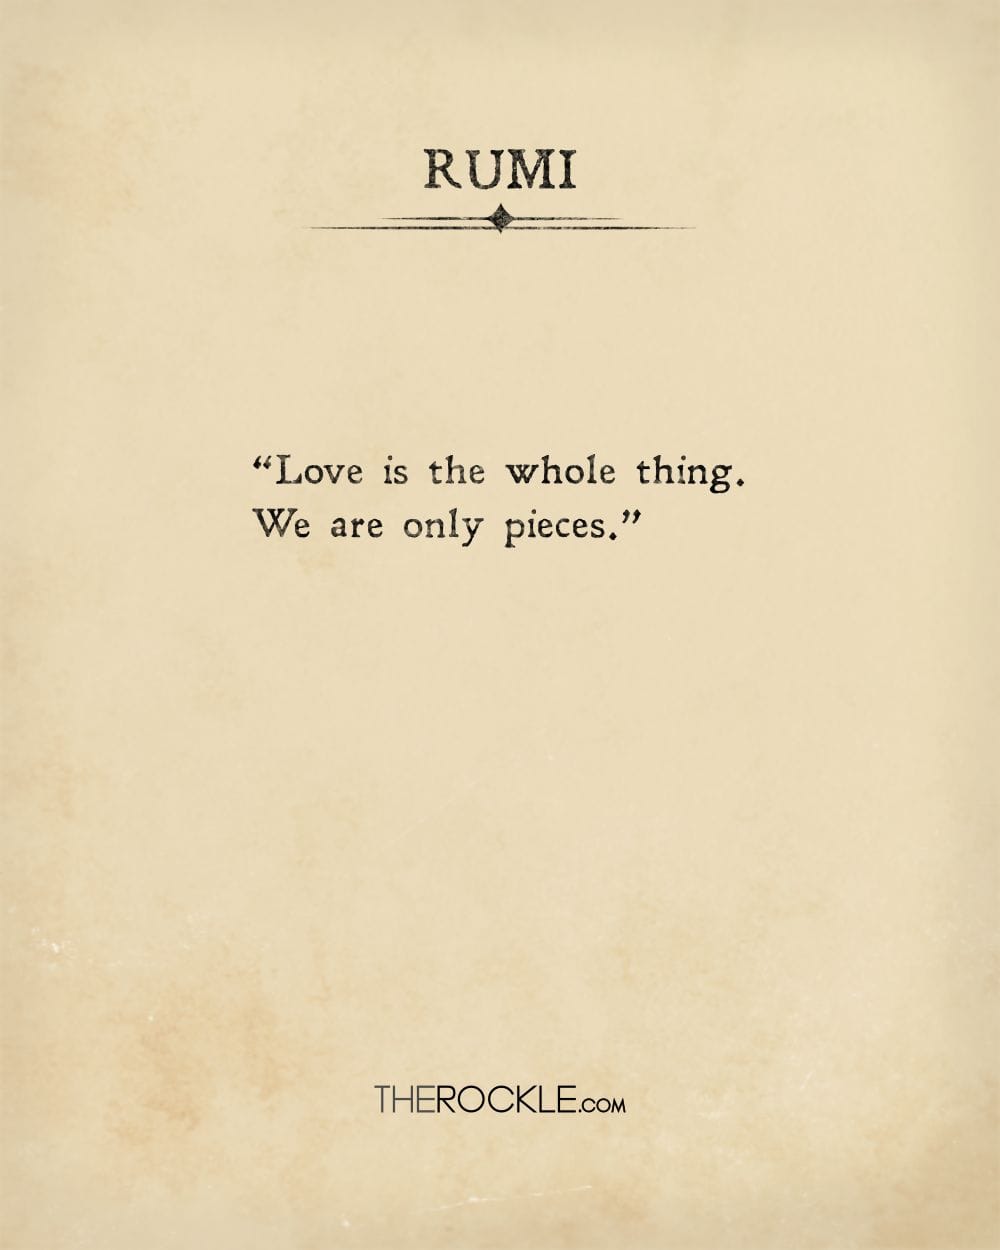 Rumi's quote about love